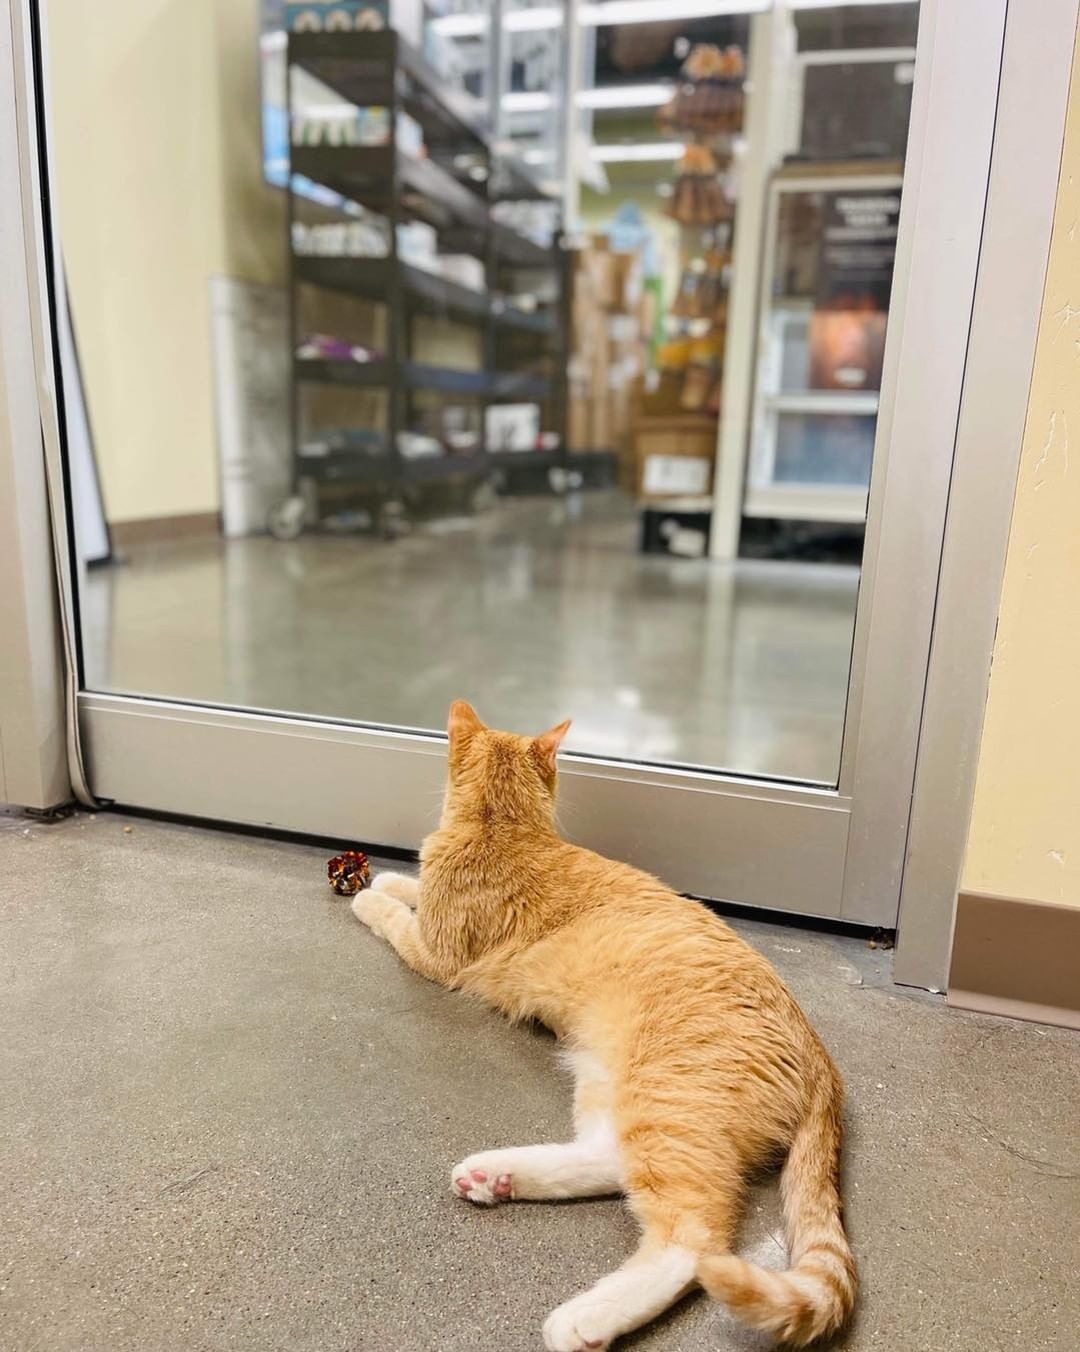 MEET ME AT PETCO! Willow has been waiting 2 weeks now for a family to stop by and discover that she is friendly, playful, funny, cute, an amazing jumper, and just a great cat!

Stop by the Ames Petco now and say hi!😻<a target='_blank' href='https://www.instagram.com/explore/tags/boonehumanesociety/'>#boonehumanesociety</a> <a target='_blank' href='https://www.instagram.com/explore/tags/adoptwillow/'>#adoptwillow</a> <a target='_blank' href='https://www.instagram.com/explore/tags/adoptlove/'>#adoptlove</a> <a target='_blank' href='https://www.instagram.com/explore/tags/adoptatpetco/'>#adoptatpetco</a>